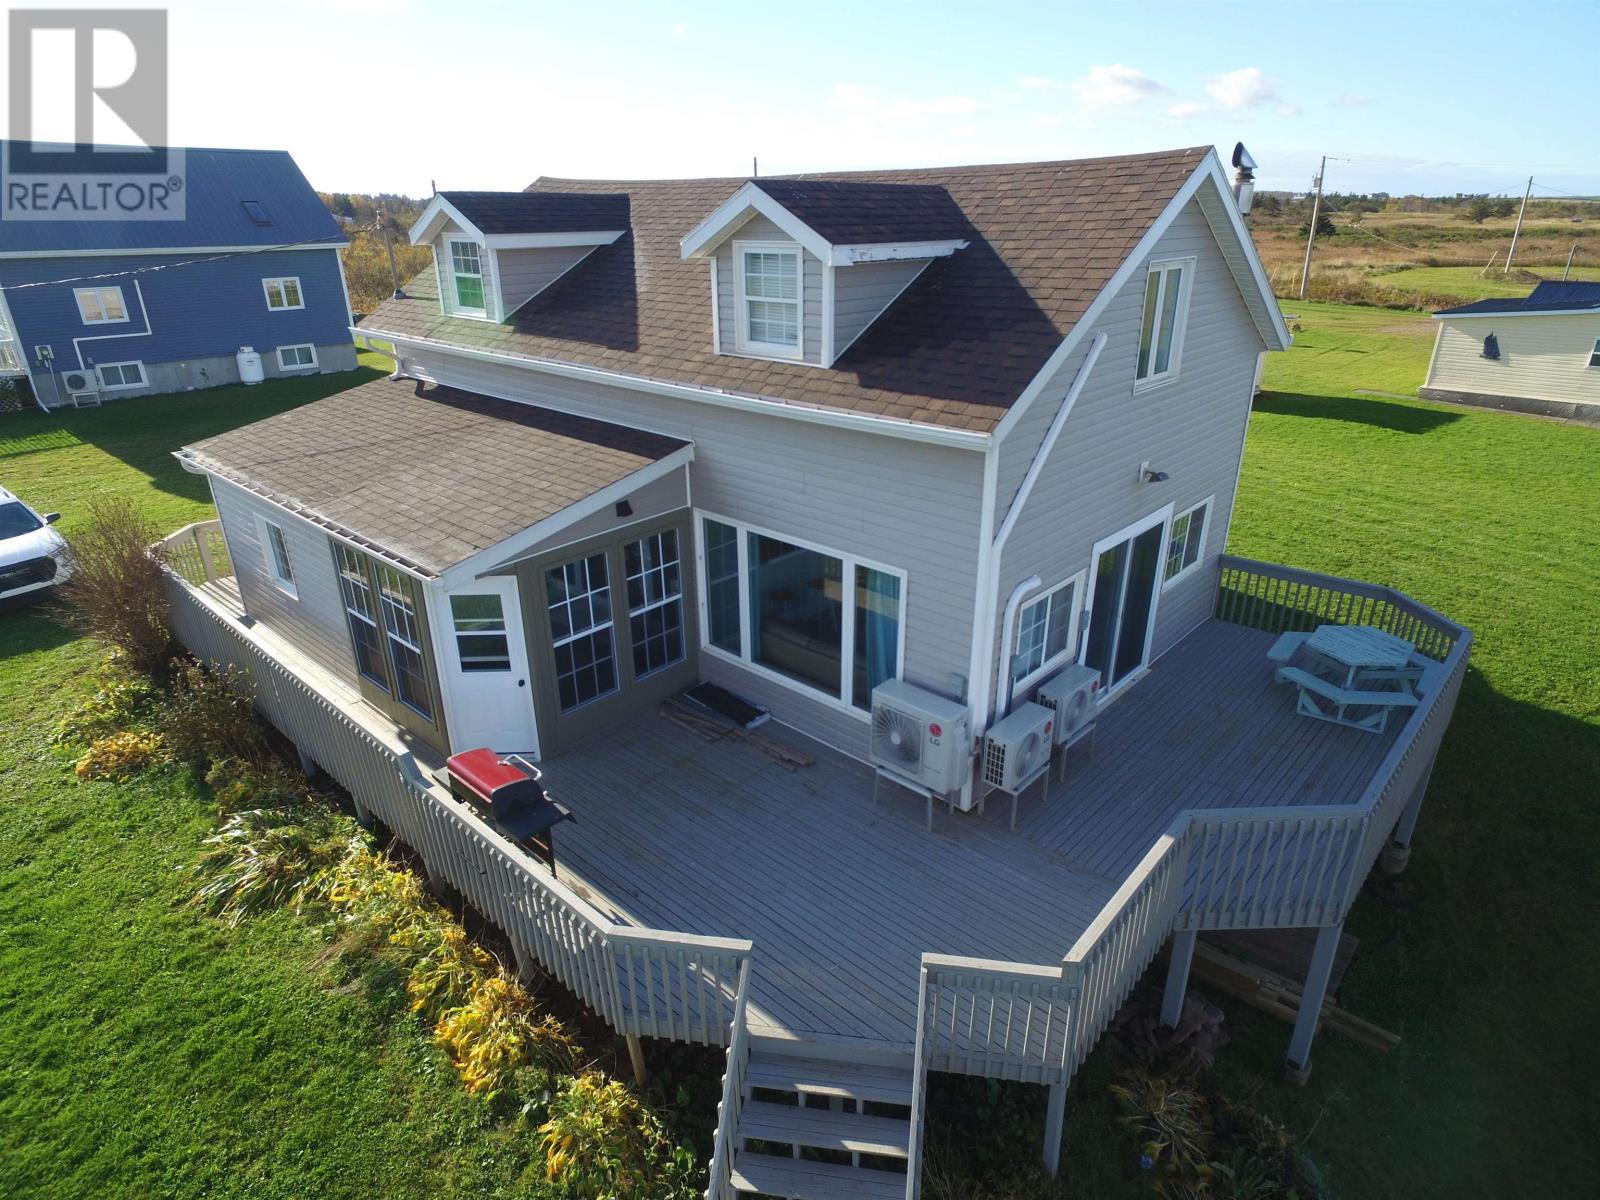 131 Nail Pond Shore Road131 Nail Pond Shore Road, Nail Pond, Prince Edward Island C0B2B0, 3 Bedrooms Bedrooms, ,2 BathroomsBathrooms,Single Family,For Sale,131 Nail Pond Shore Road,202321926